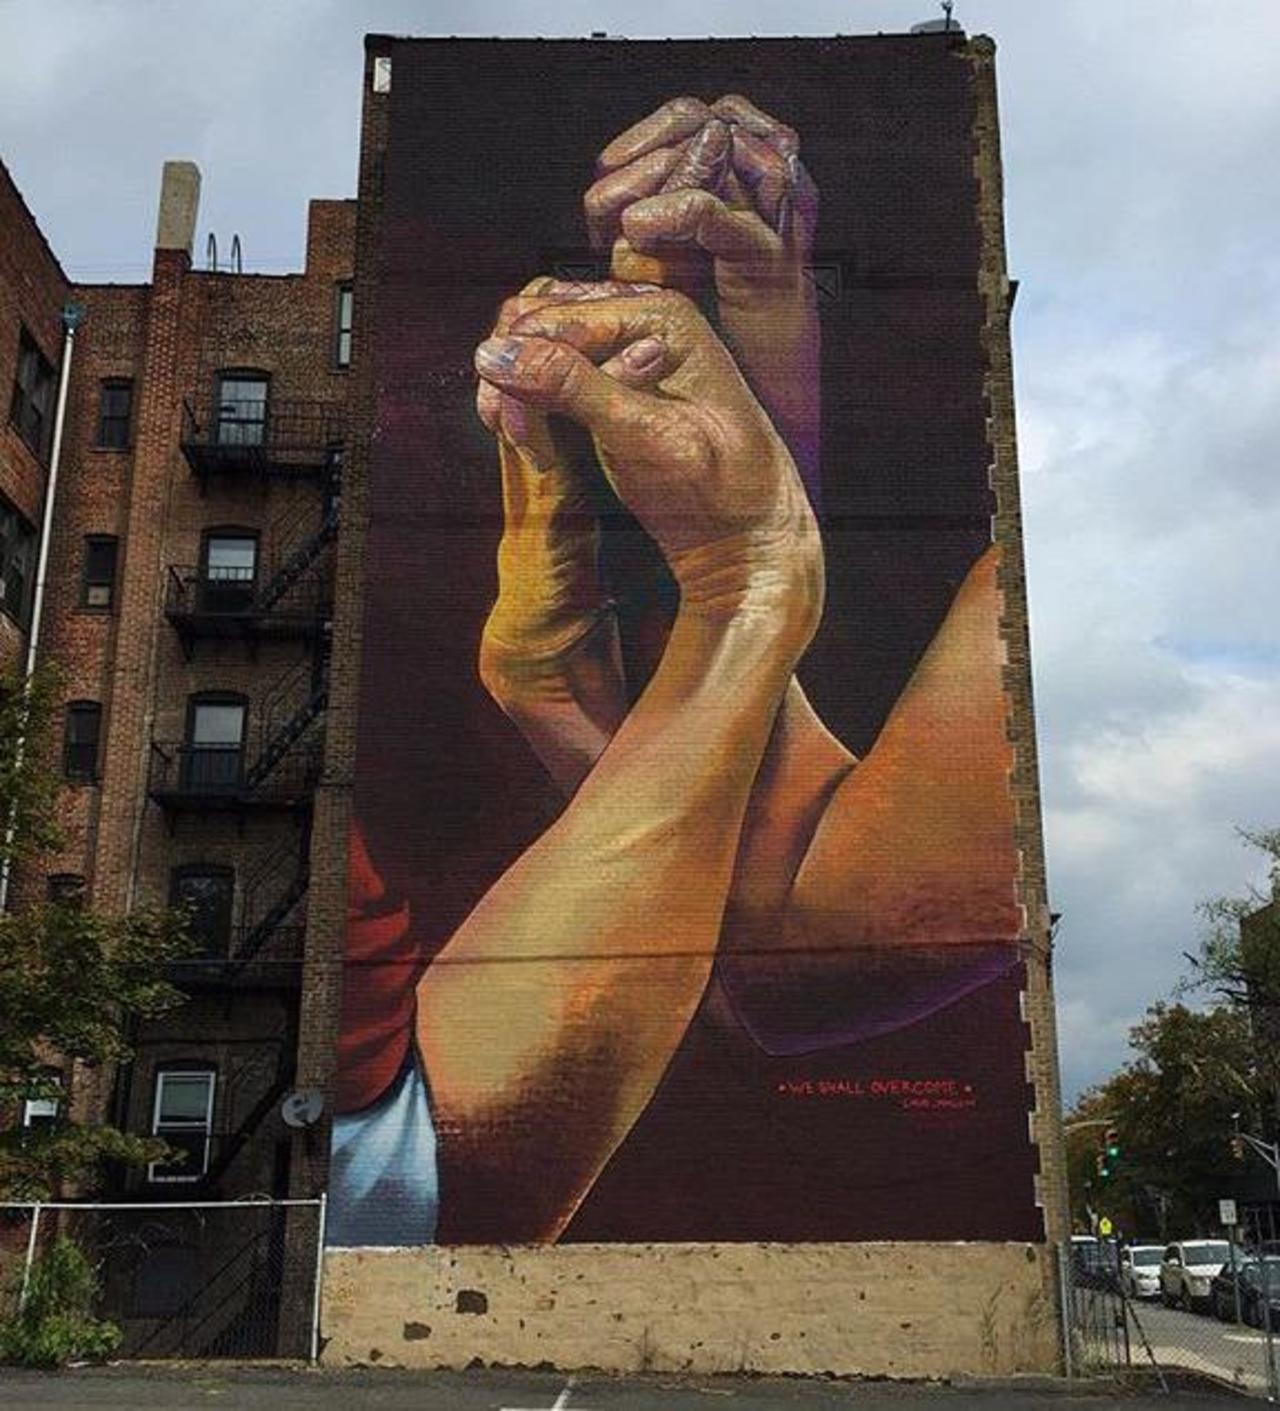 RT @artlife365: New Street Art by CaseMaclaim in Jersey City for the TheBKcollective 

#art #graffiti #mural #streetart http://t.co/MZBPWPic8L